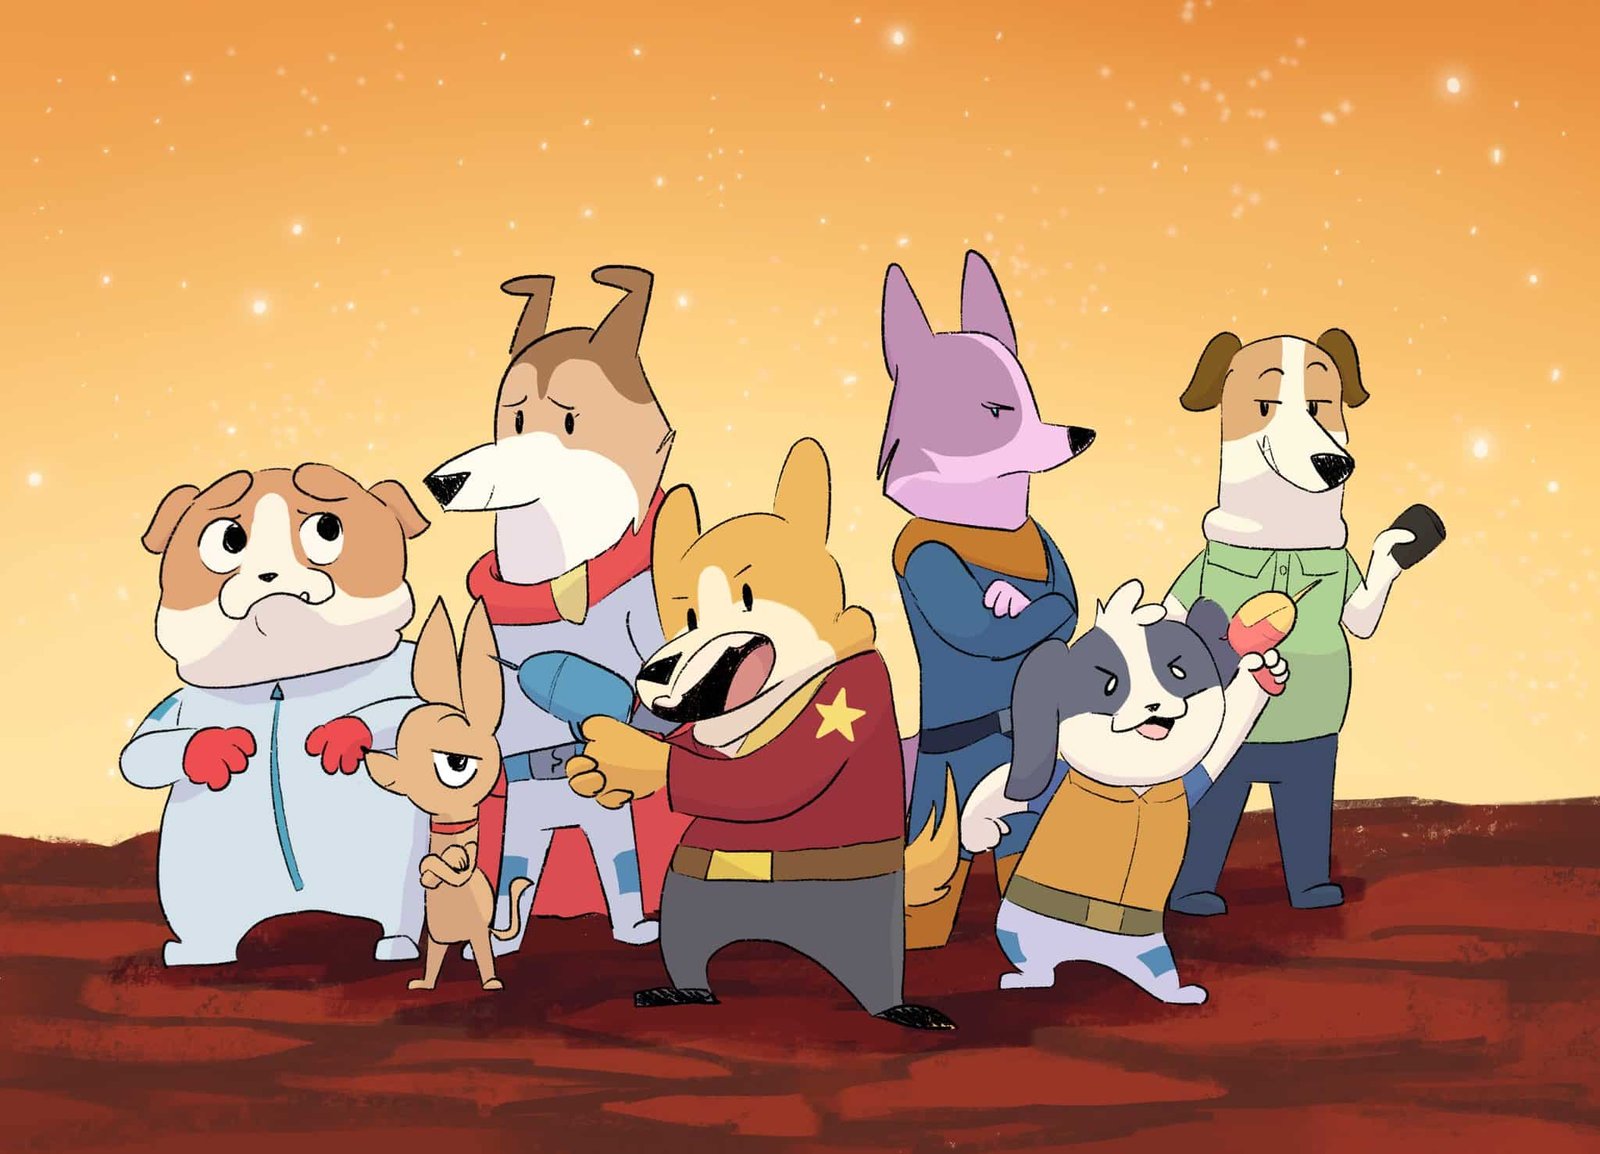 What kind of dogs are Dogs in Space Netflix?